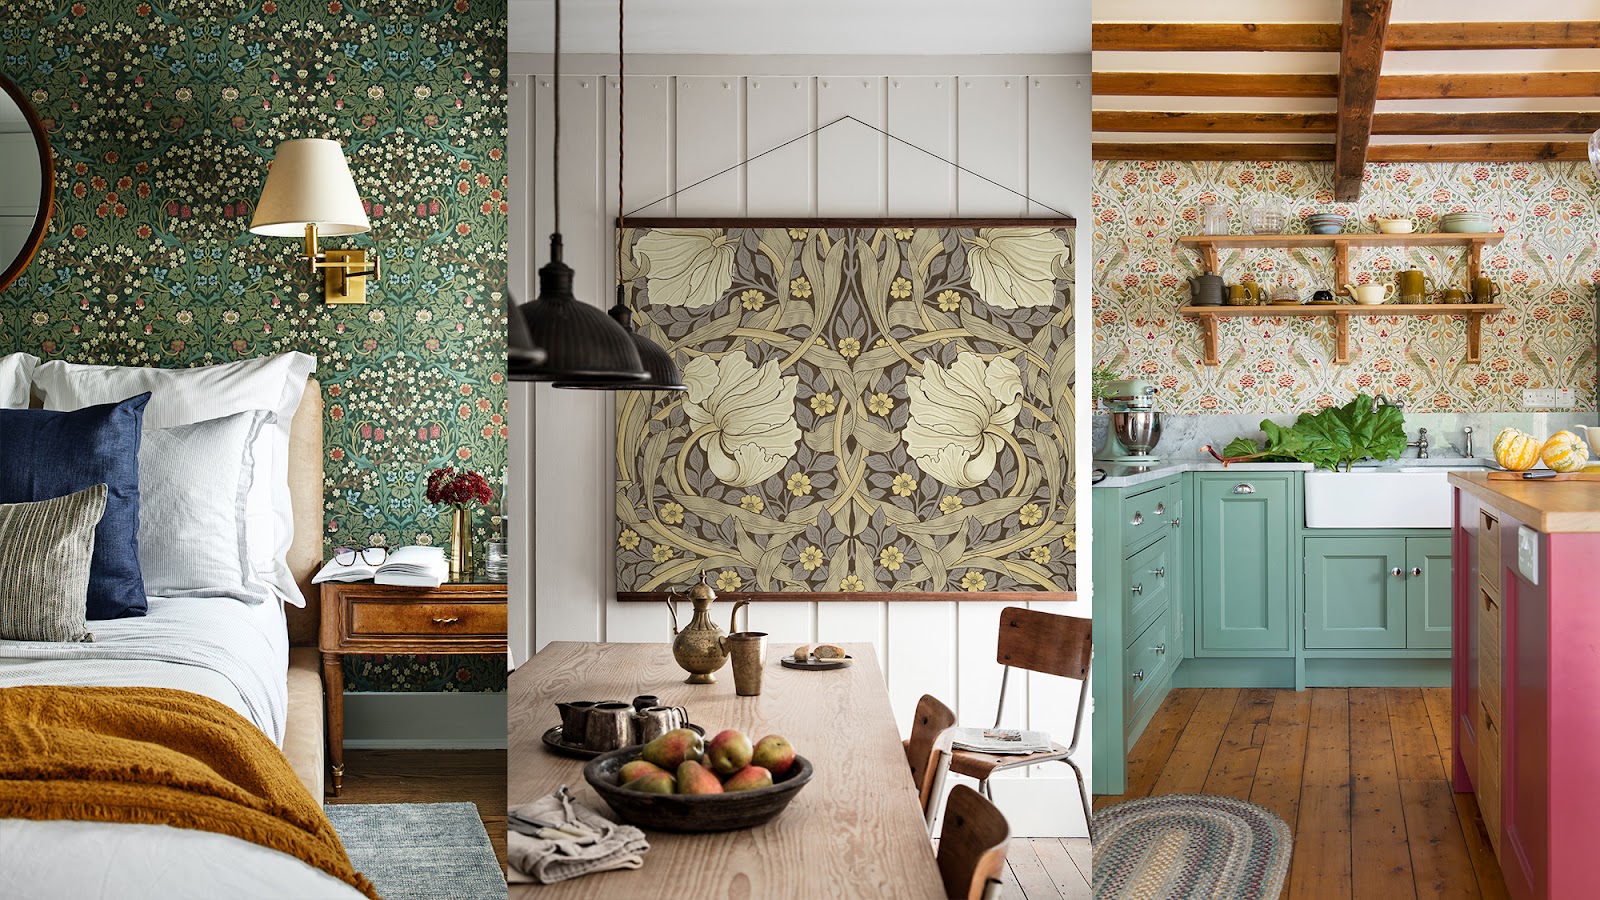 Get Ready for Top 15 Home Decor Trends Taking Over 2023- A Preview Guide